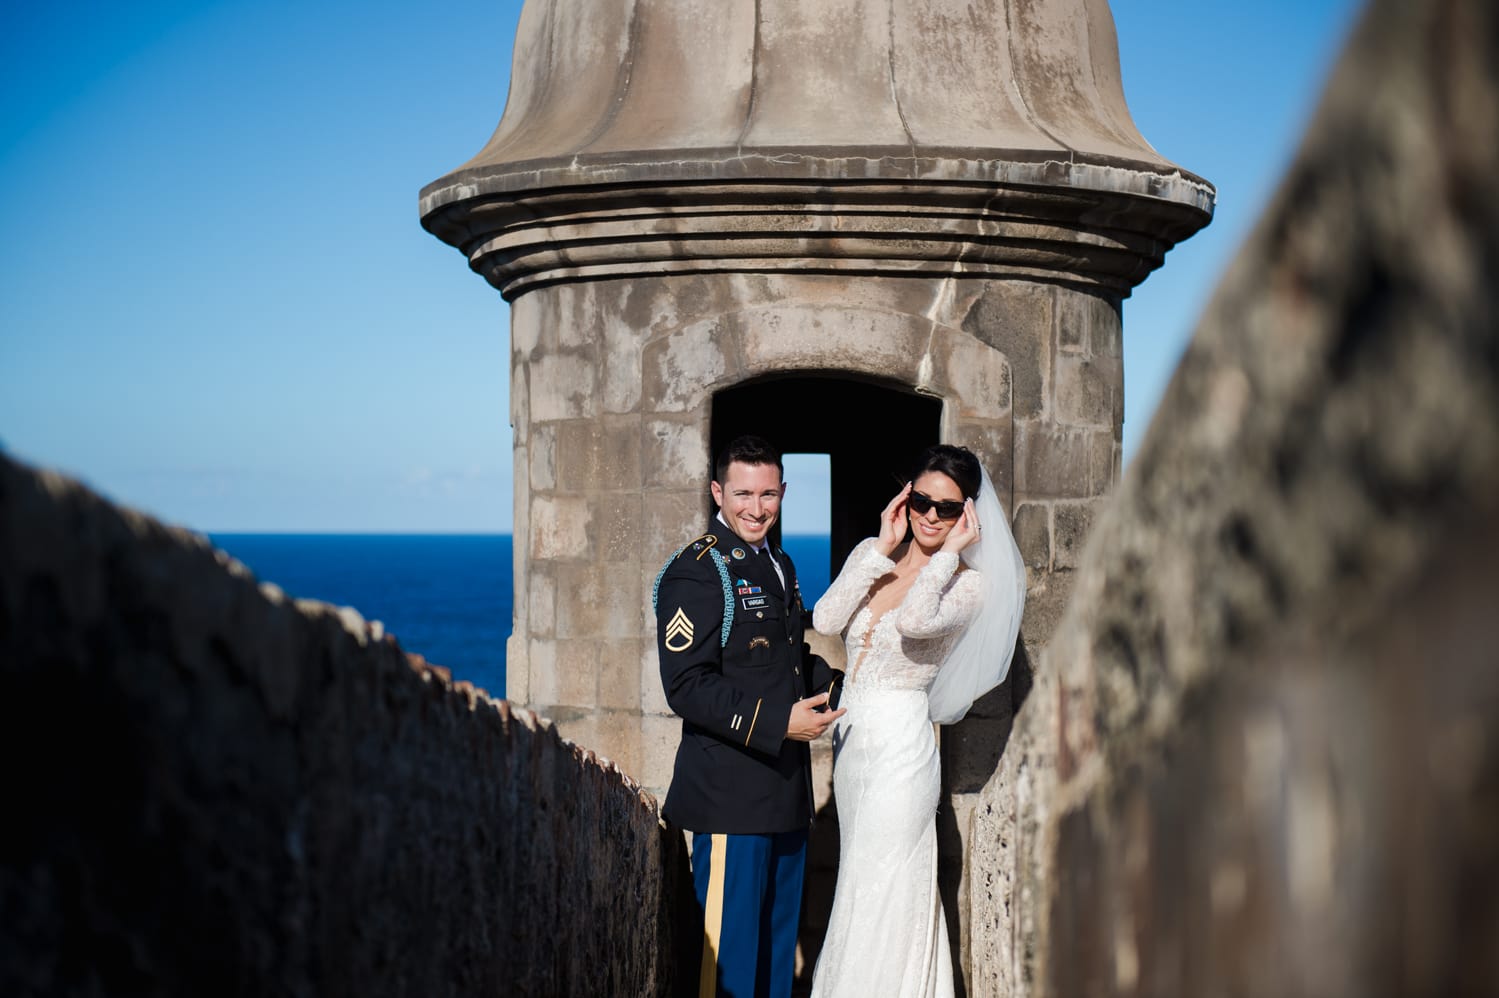 destination wedding ceremony at El Morro Fortress by Puerto Rico photographer Camille Fontanez